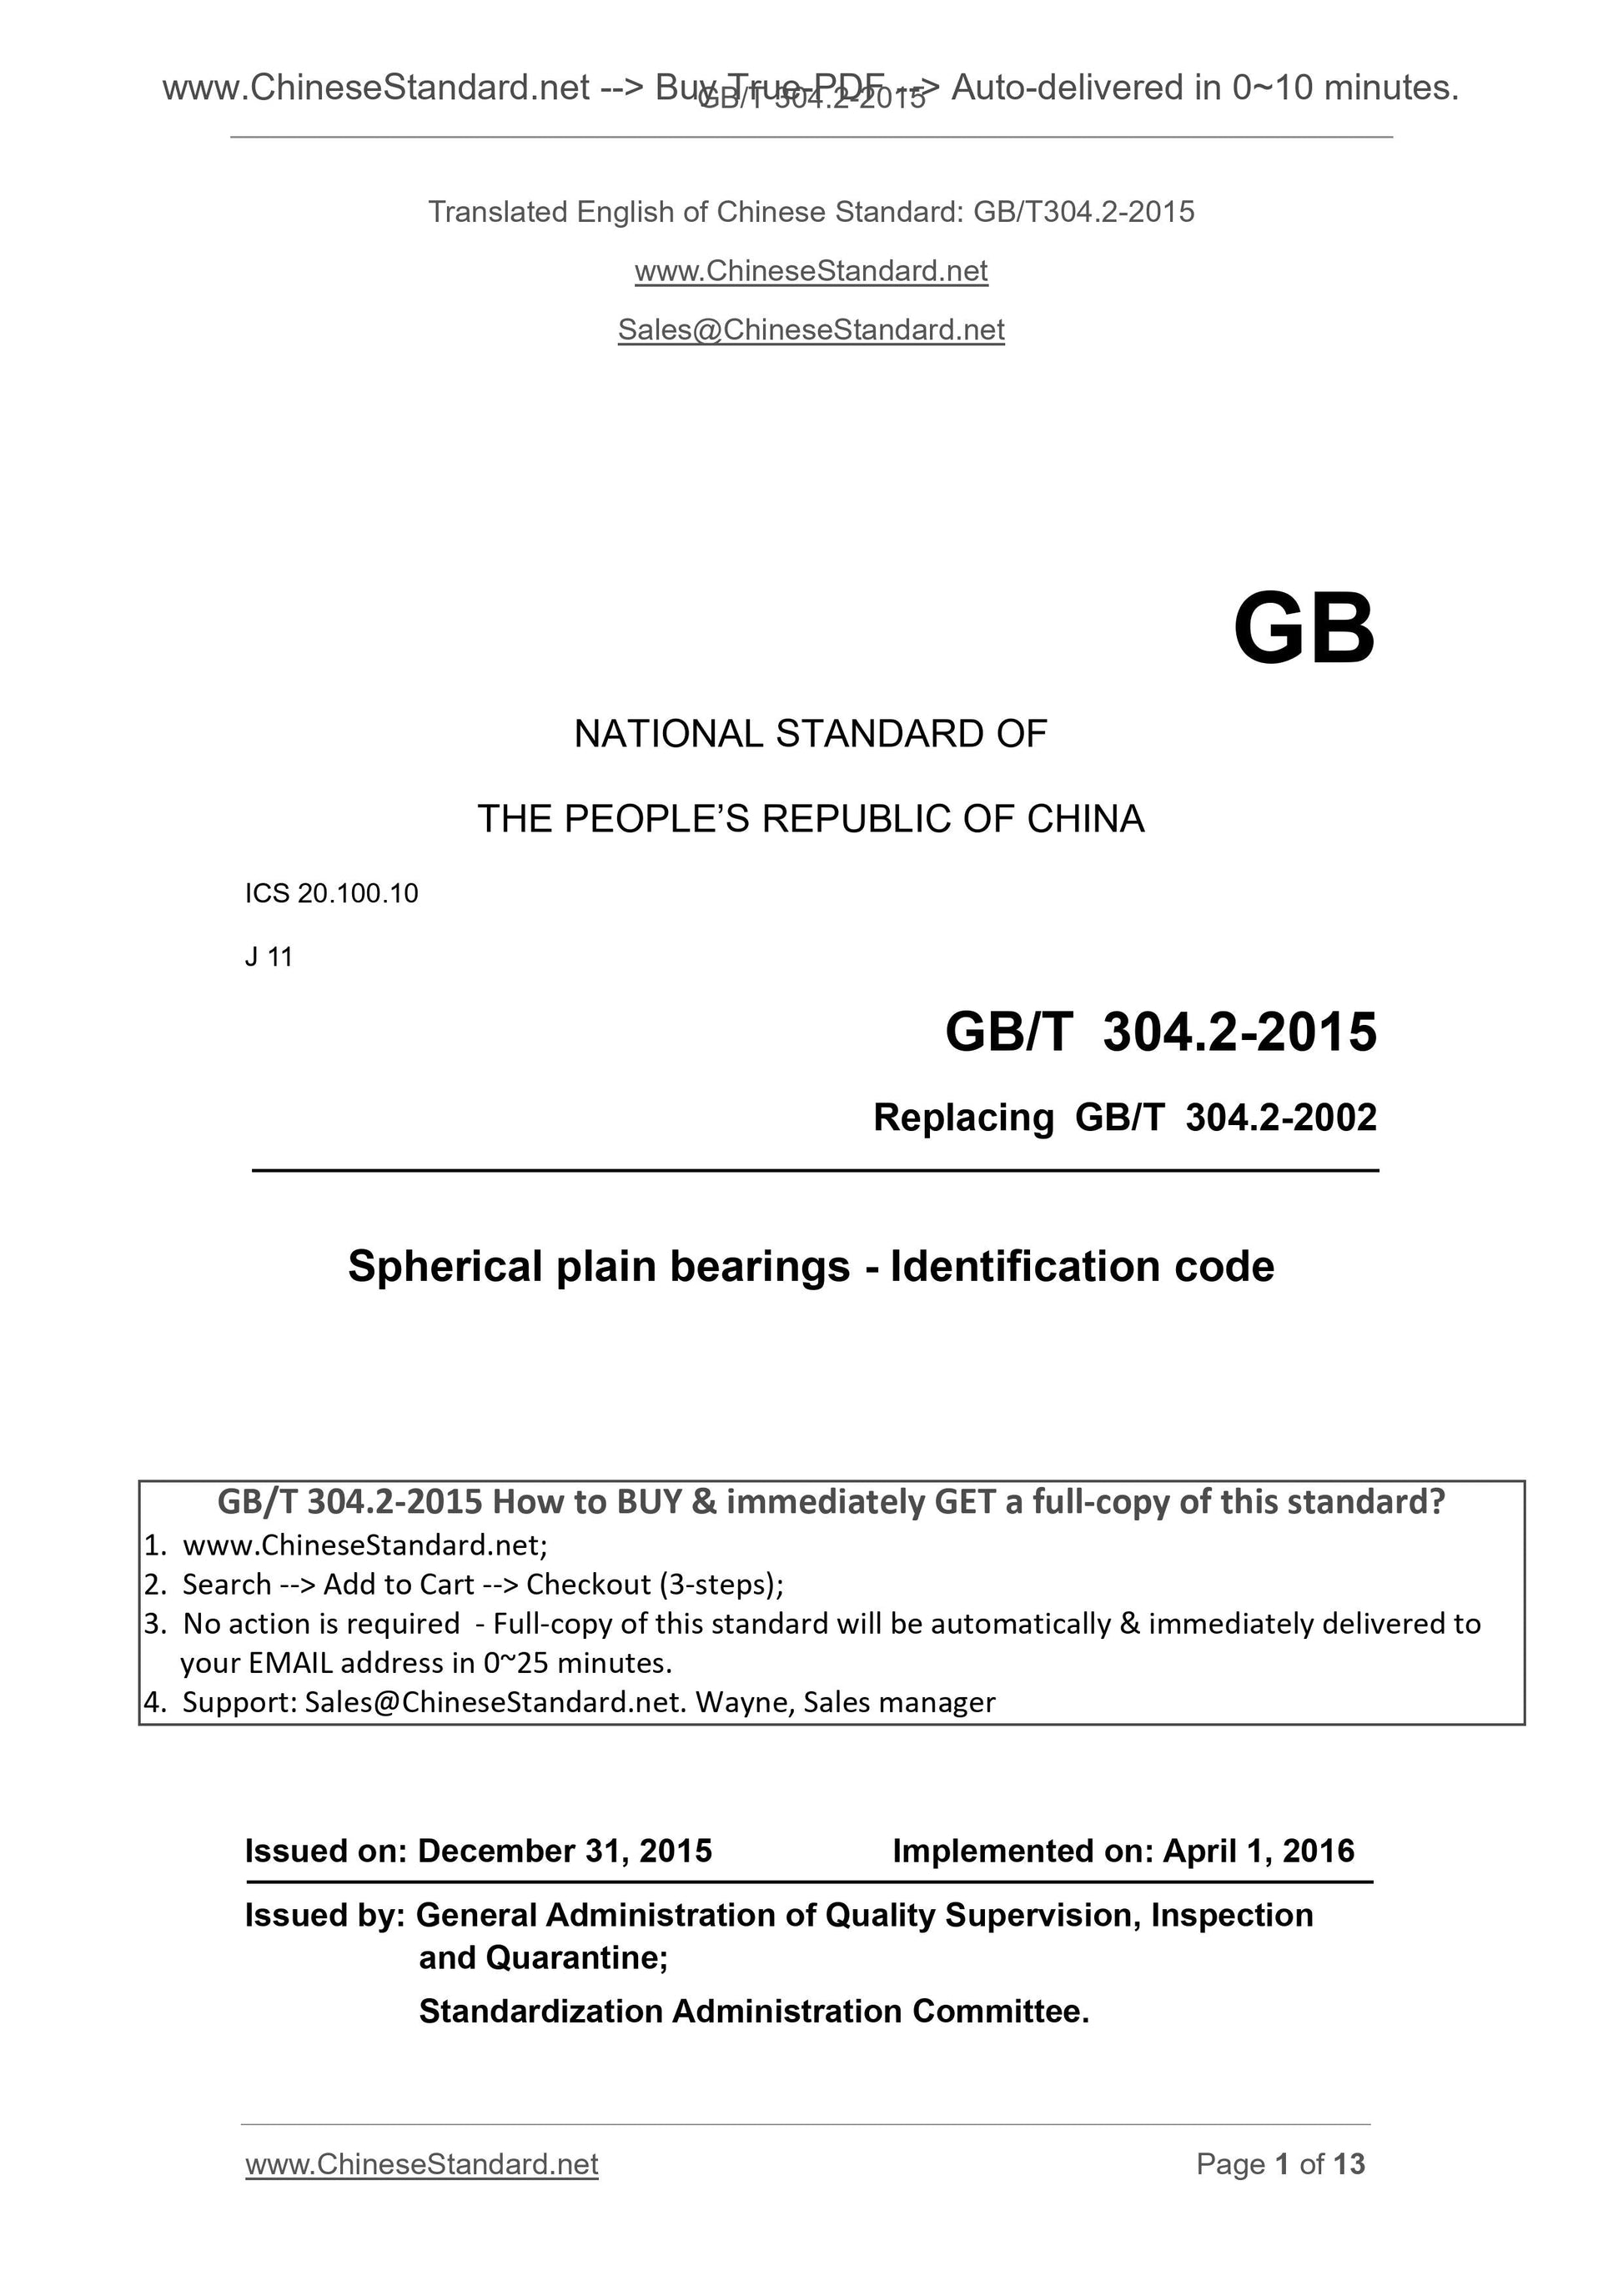 GB/T 304.2-2015 Page 1